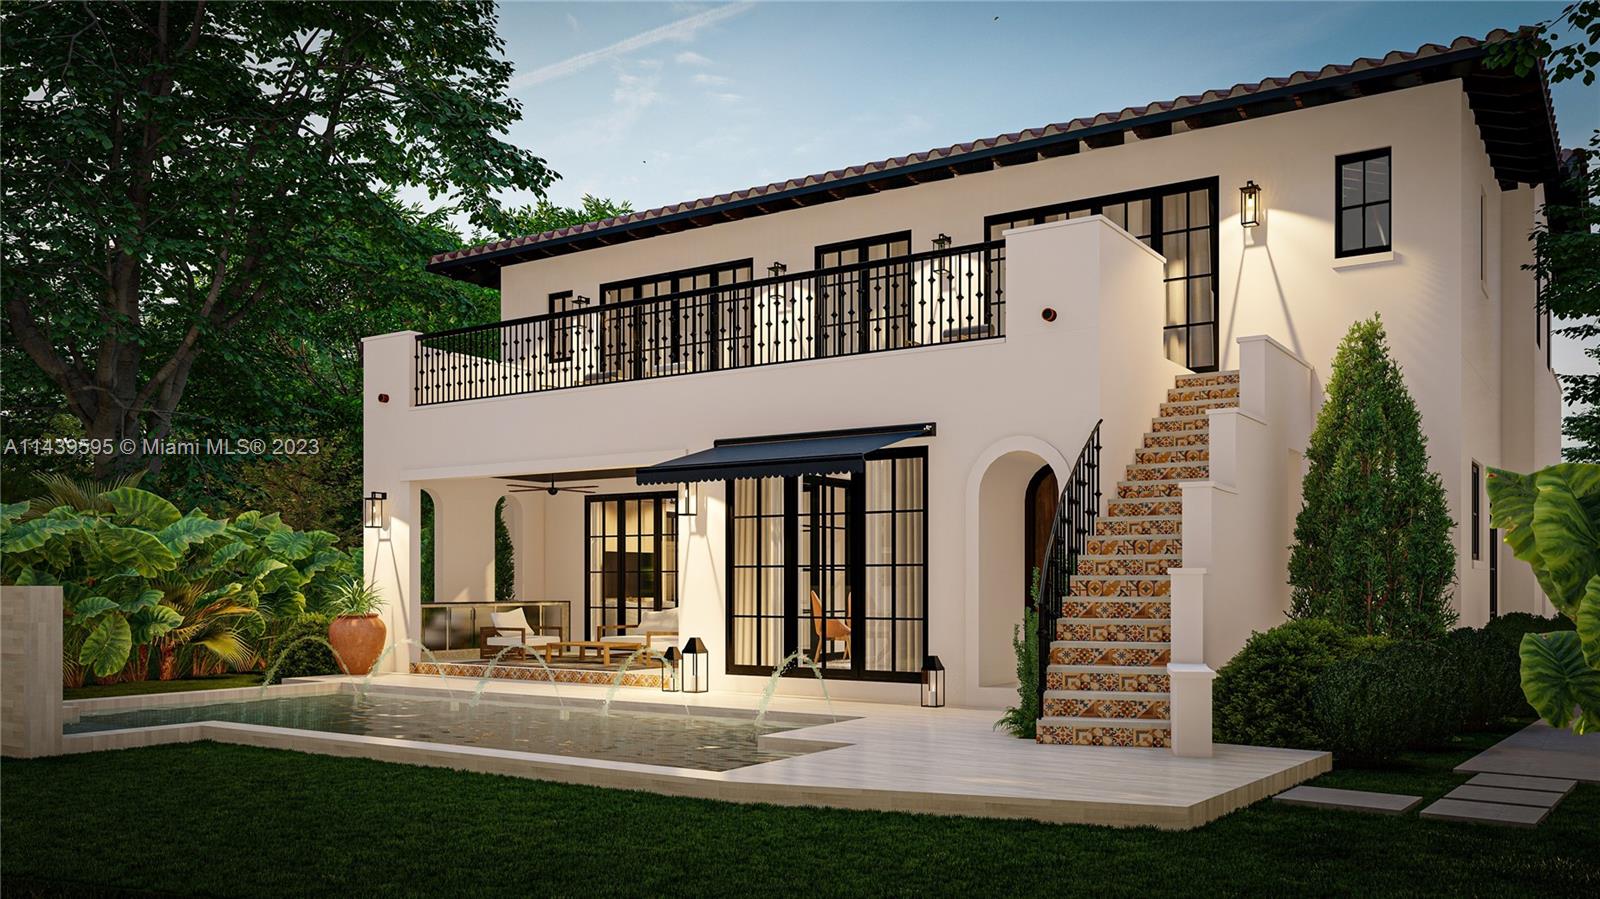 Unique opportunity to own a brand new 4,997 SF home in the heart of Coral Gables, close to the renowned Biltmore Hotel. Showcasing a Florida modern design, the 4-BD, 4-BA home was designed by Locus Architecture and constructed by The Calta Group on a beautiful 9,970 SF lot. With every detail carefully selected and expertly designed, Sensi Casa interiors blend seamlessly with high-impact windows and doors, an exquisite gourmet Mia Cucina kitchen with luxury appliances and custom cabinetry, and state-of-the-art electronics and security system. The Nelson De Leon Florida Vernacular outdoor design showcases tropical landscaping, a charming courtyard, pool, Mia Cucina summer kitchen, and a two-car garage.